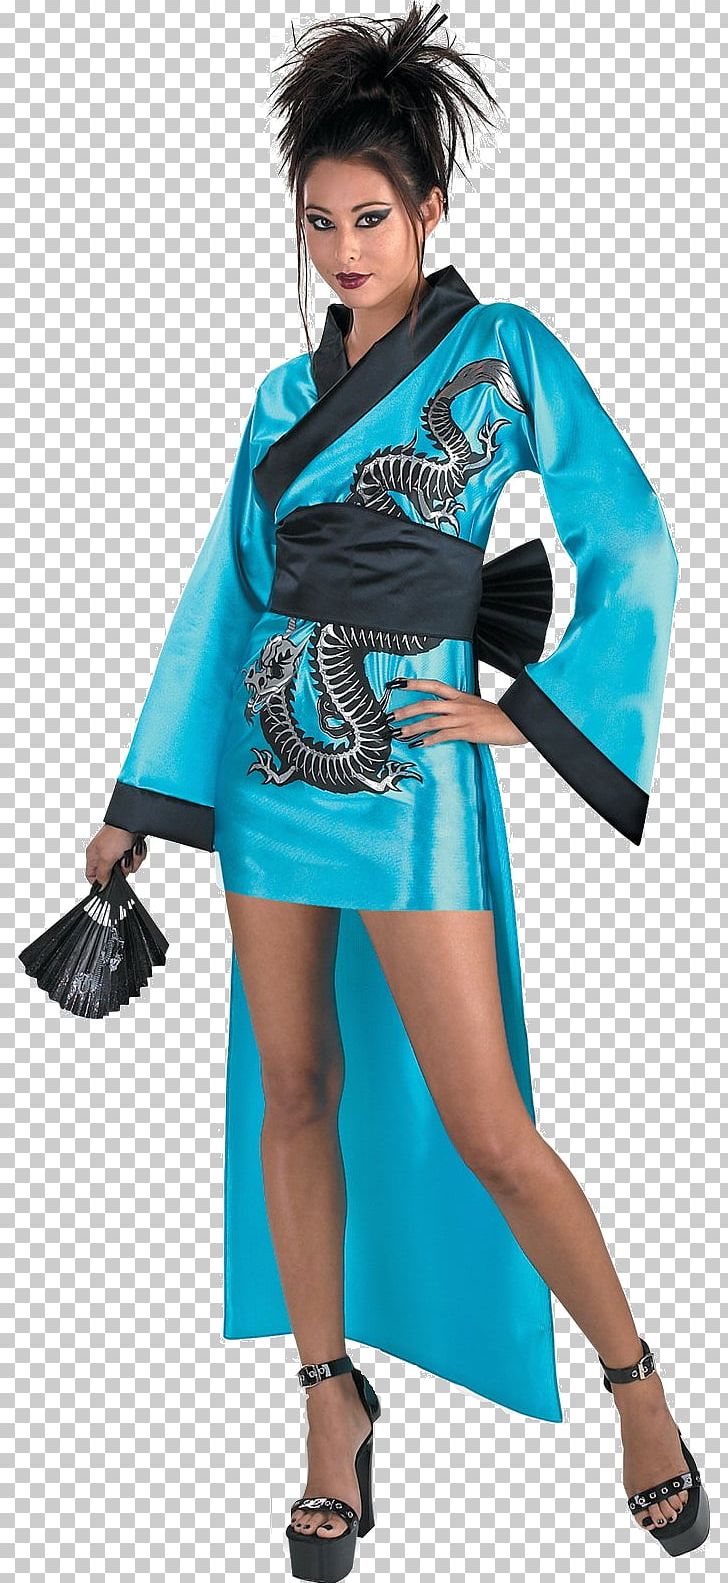 A Geisha Costume Dress Clothing PNG, Clipart, Adult, Buycostumescom, Chopsticks, Clothing, Costume Free PNG Download